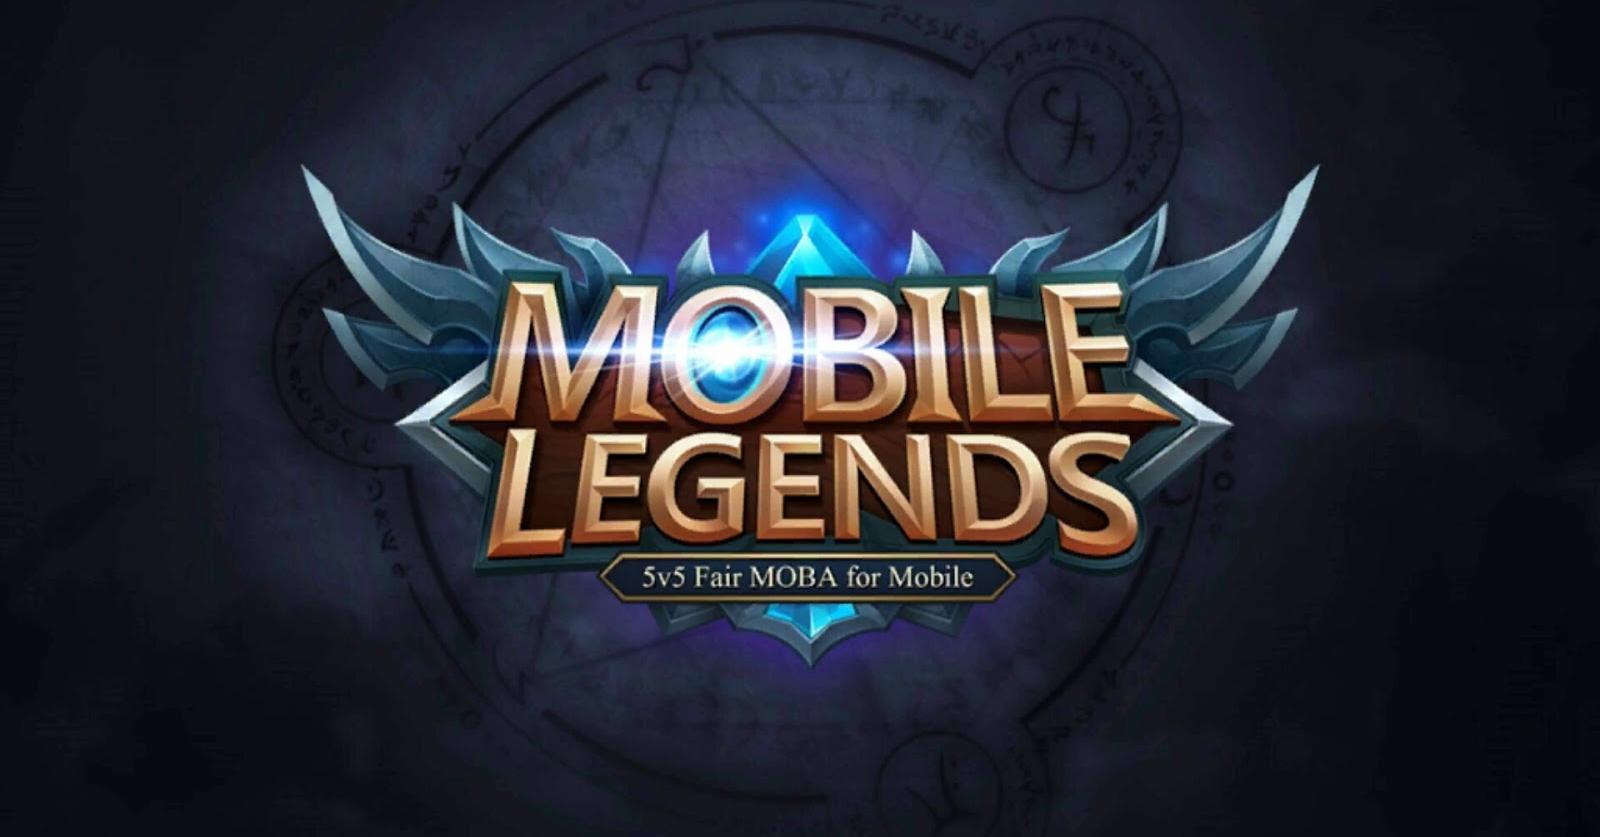 Learn How to Earn BP Easily and Quickly in Mobile Legends